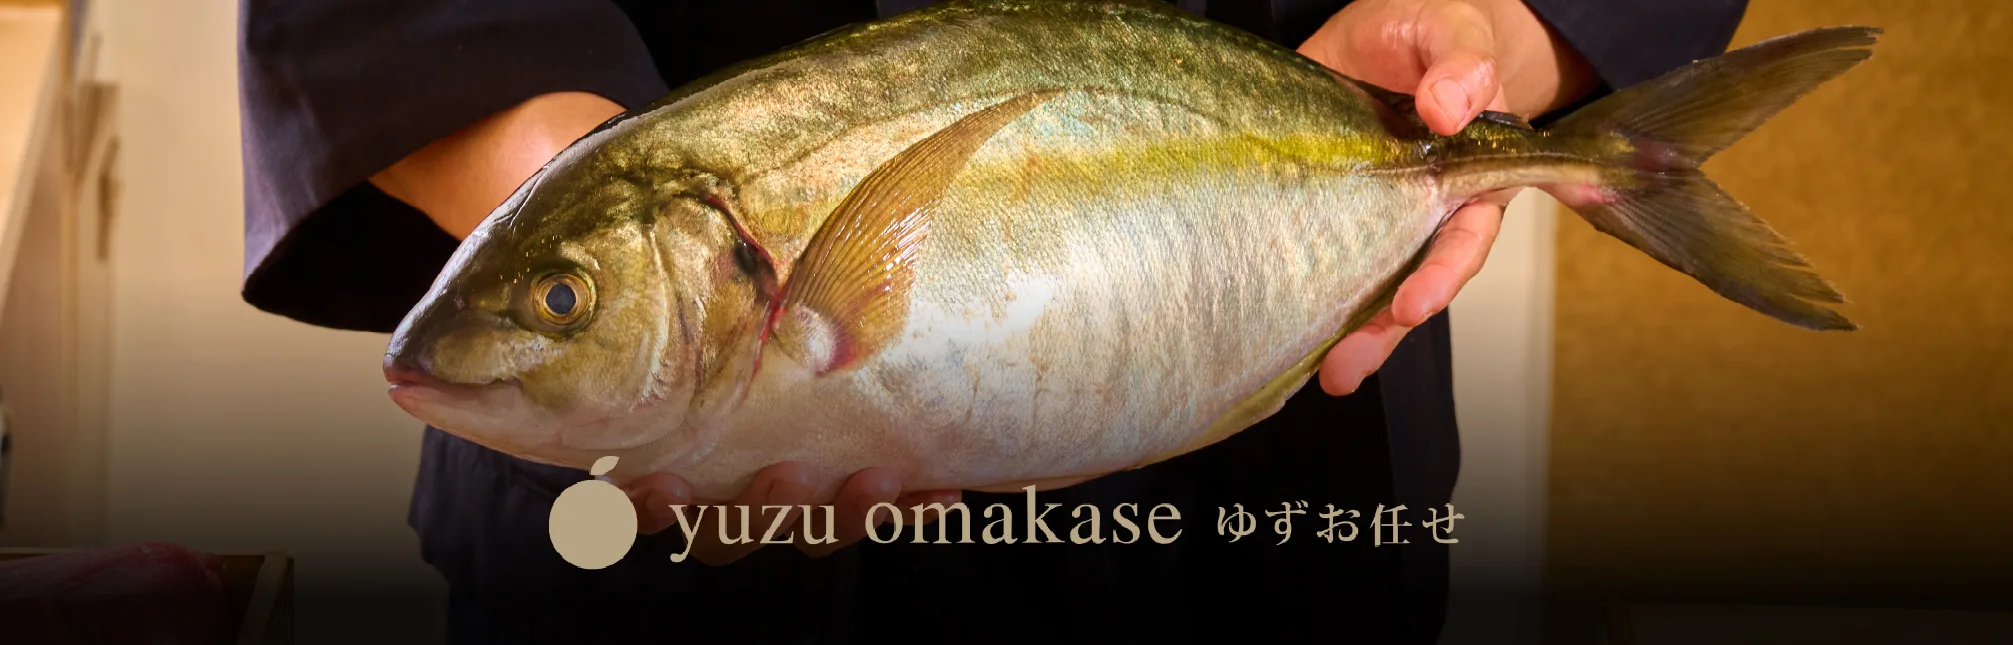 From Tokyo to Thailand: The Culinary Tapestry of Yuzu Omakase